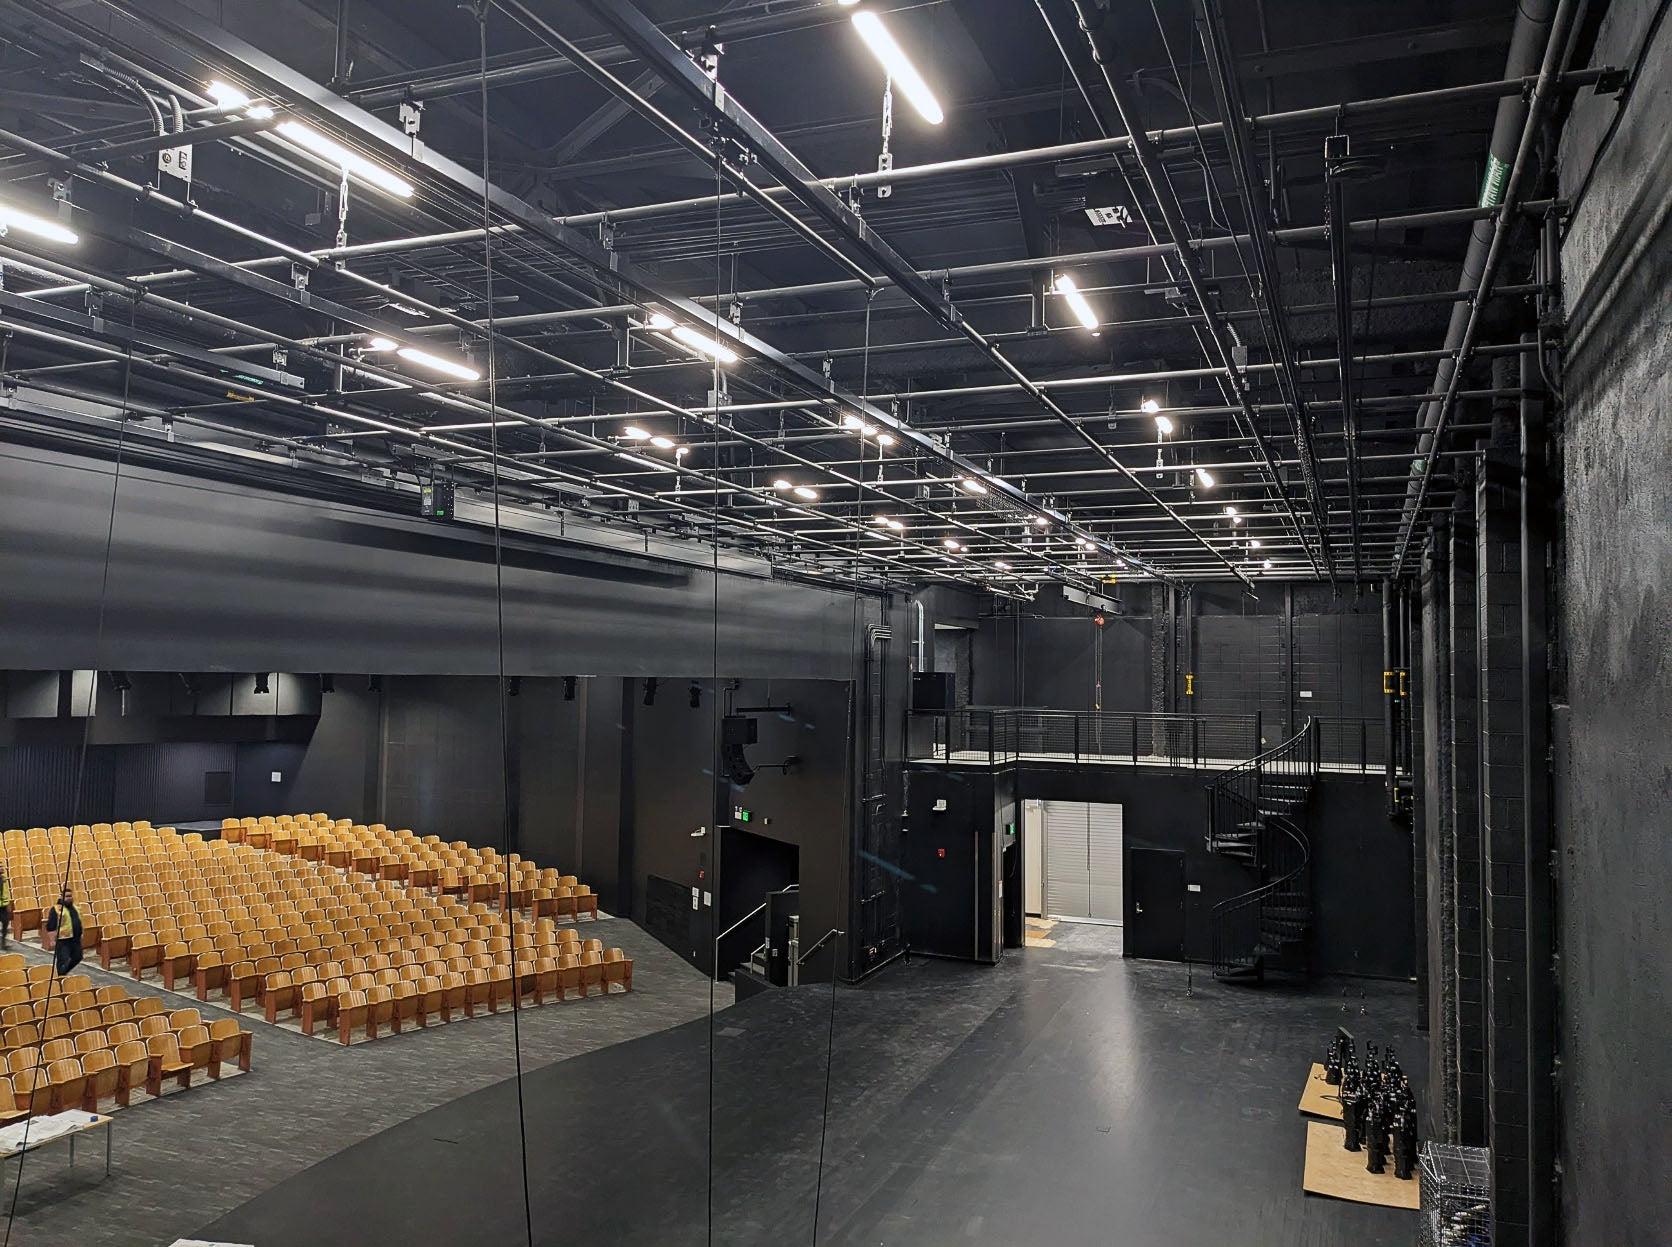 a grid of rigging hardware is shown above a stage with a view of the auditorium audience area